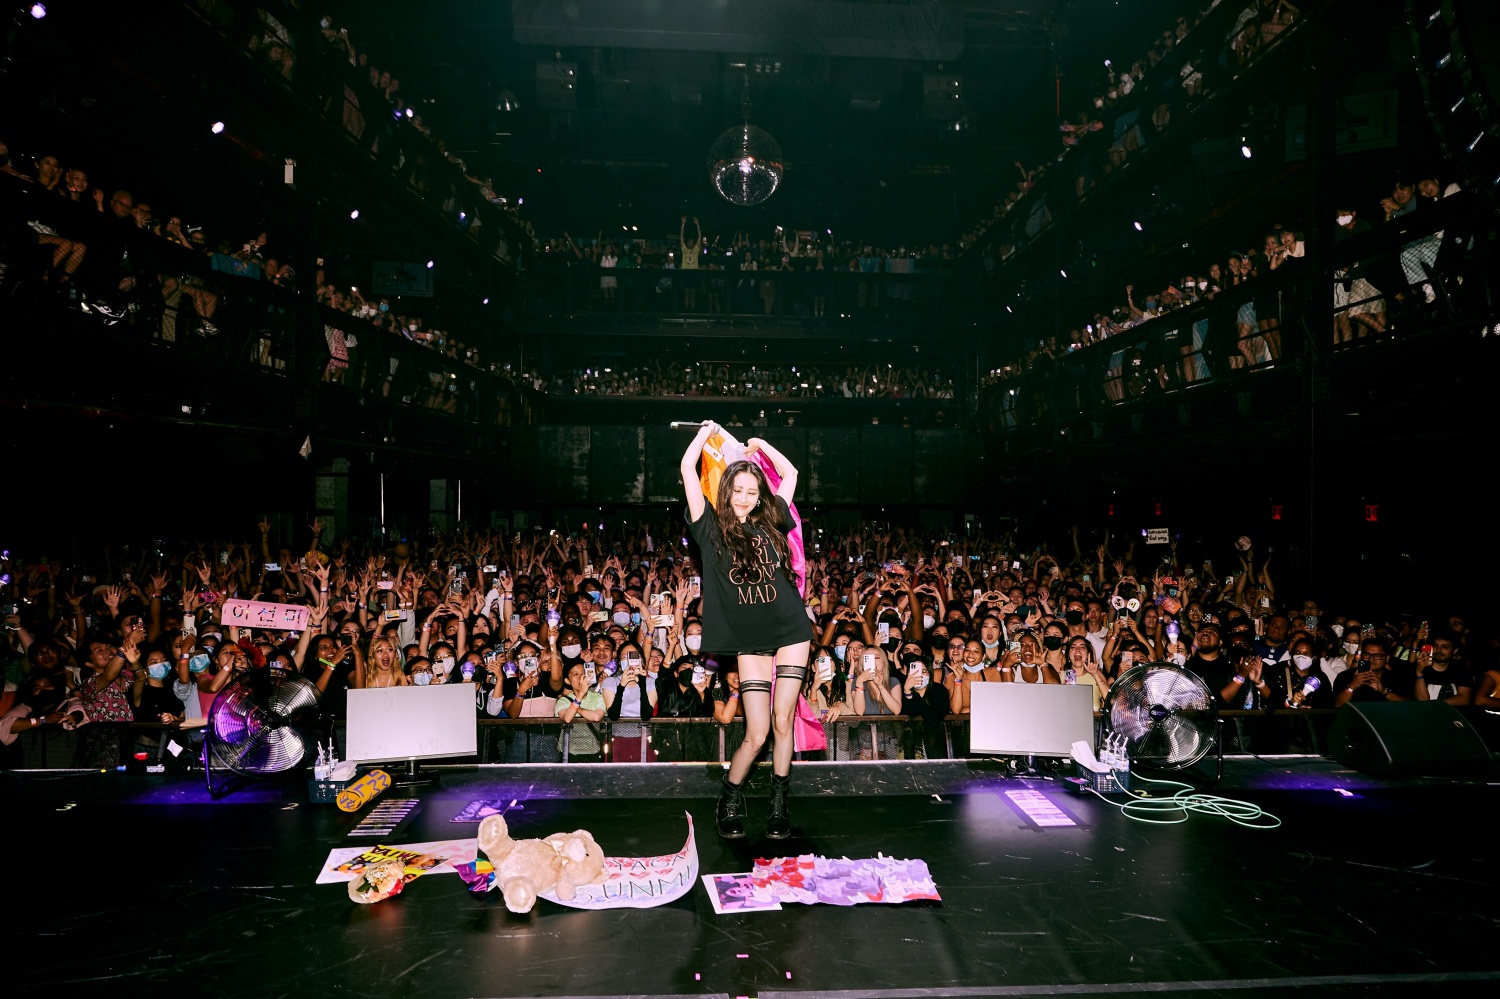 New York Gone Mad for Sunmi – summary of the GOOD GIRL GONE MAD tour in New York!